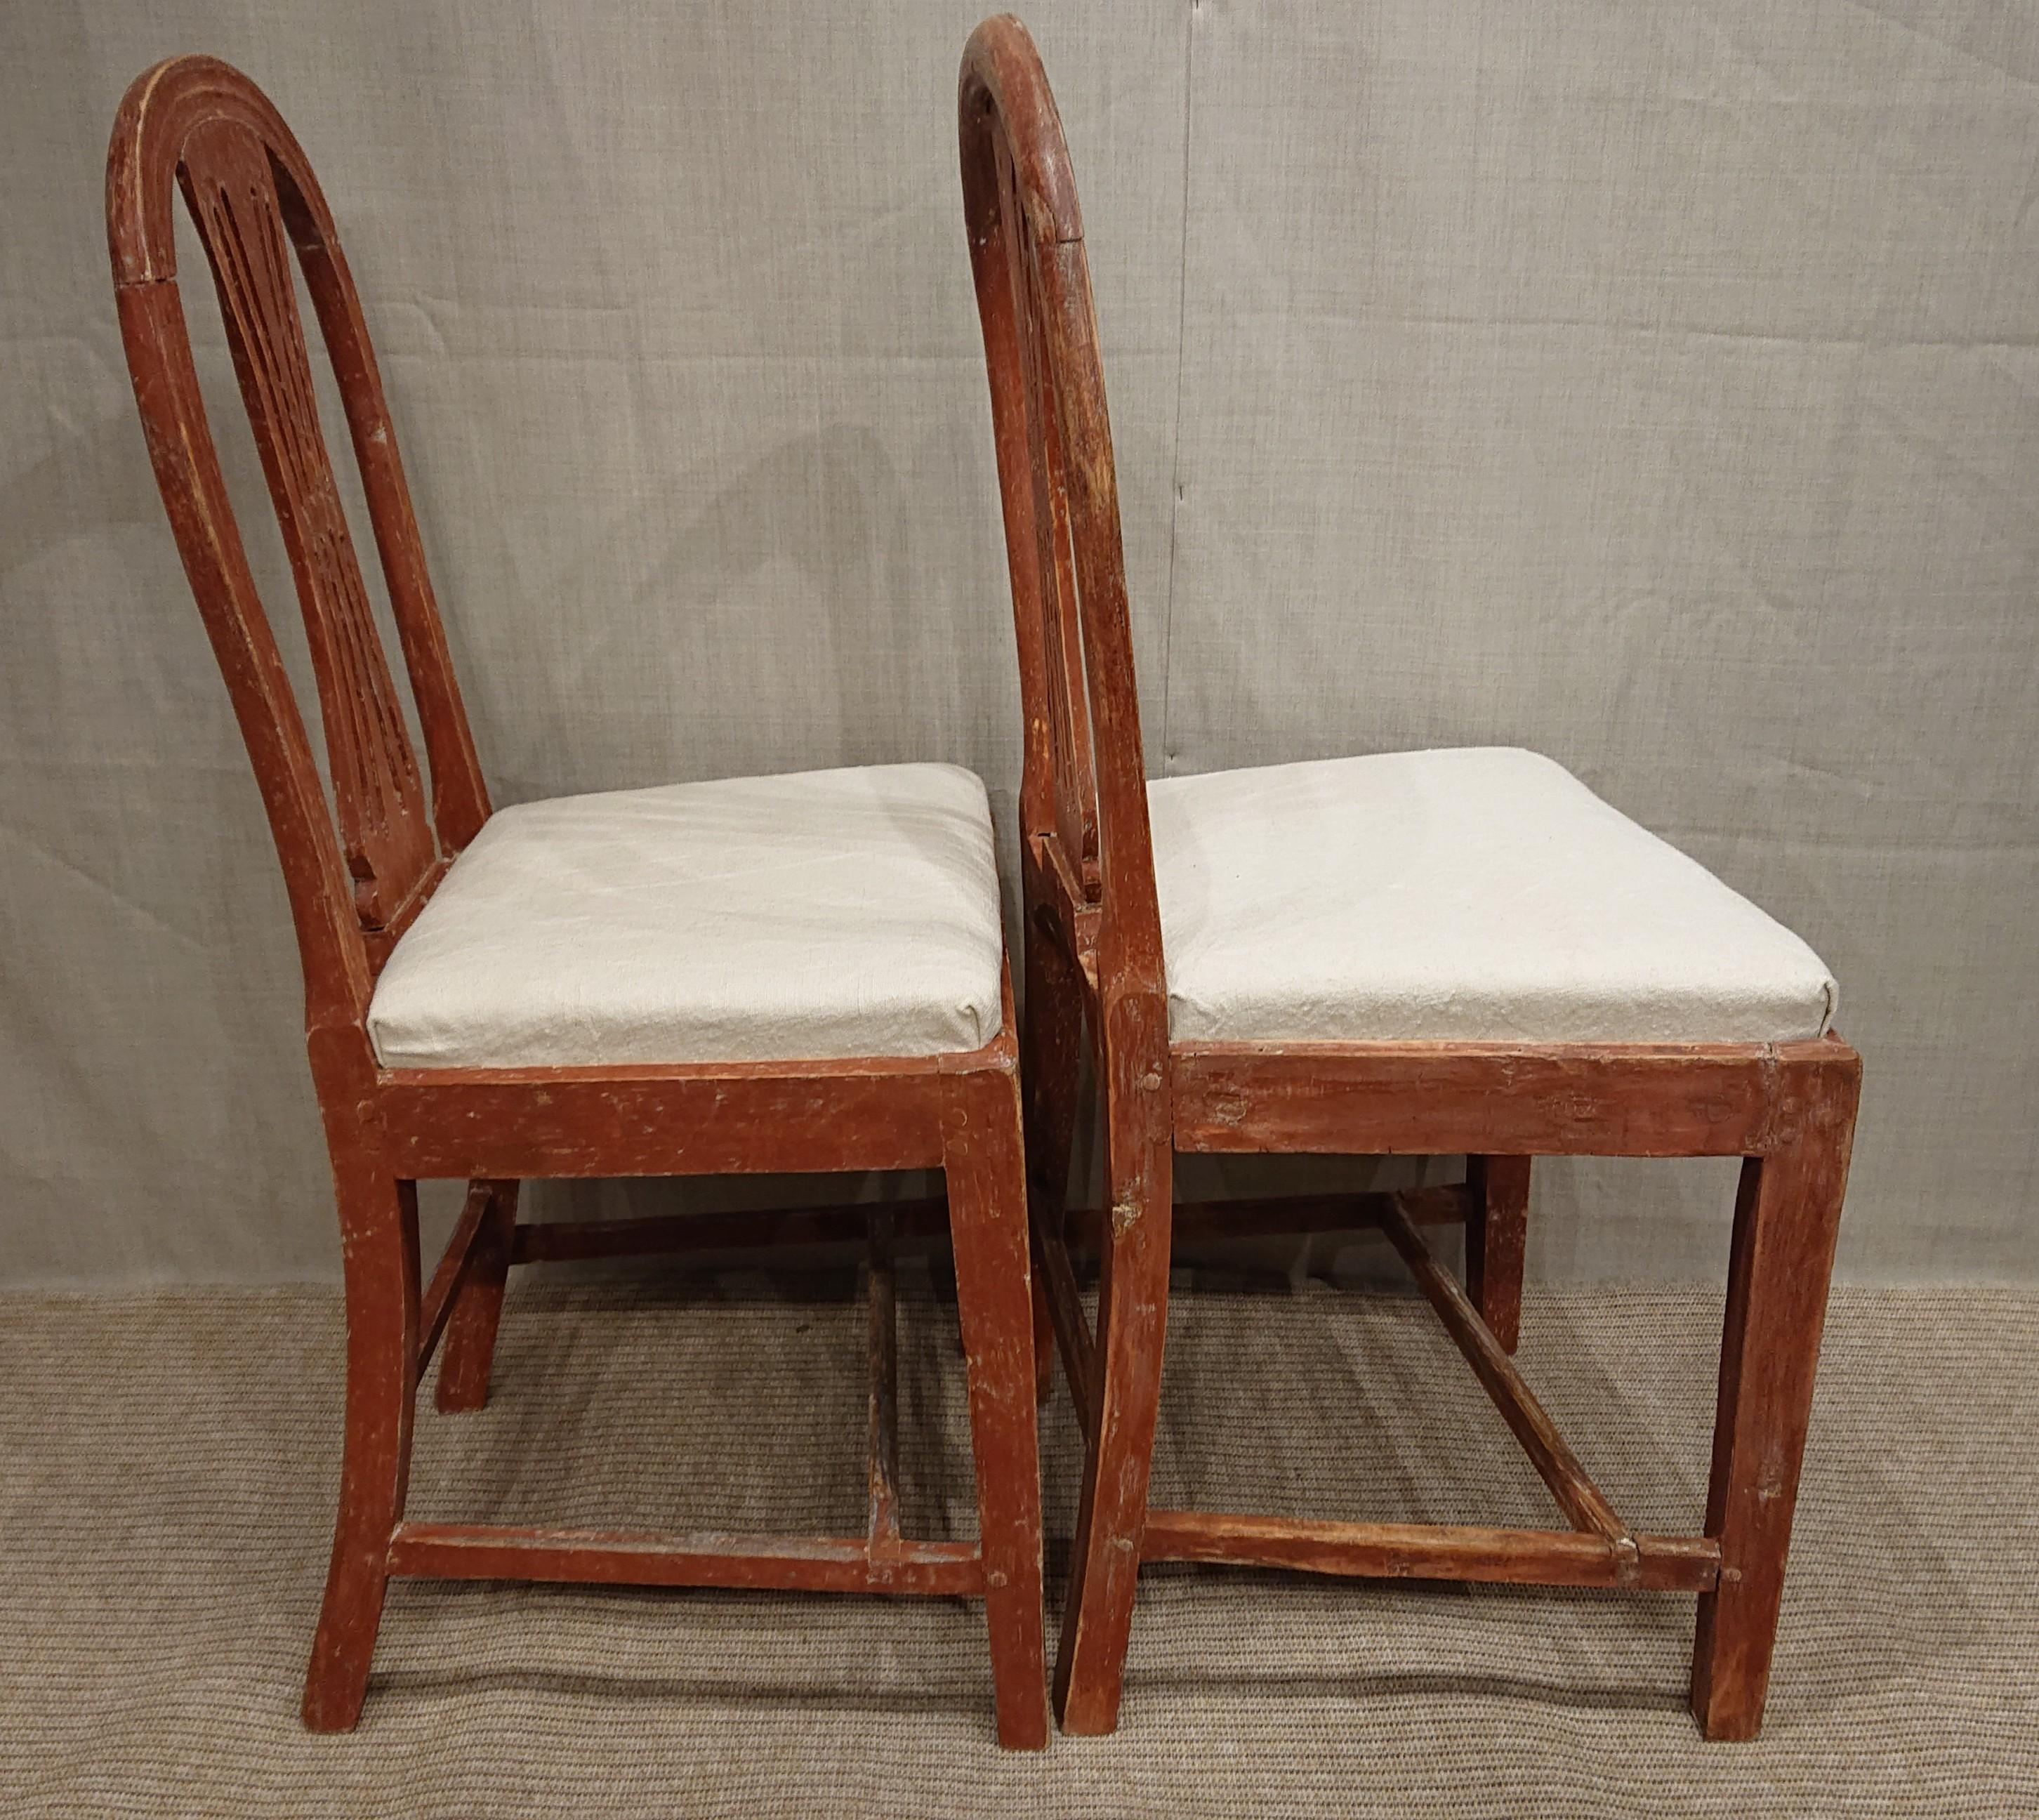 Pine 19th Century Swedish Gustavian Chairs with Original Paint Swedish Antiques For Sale